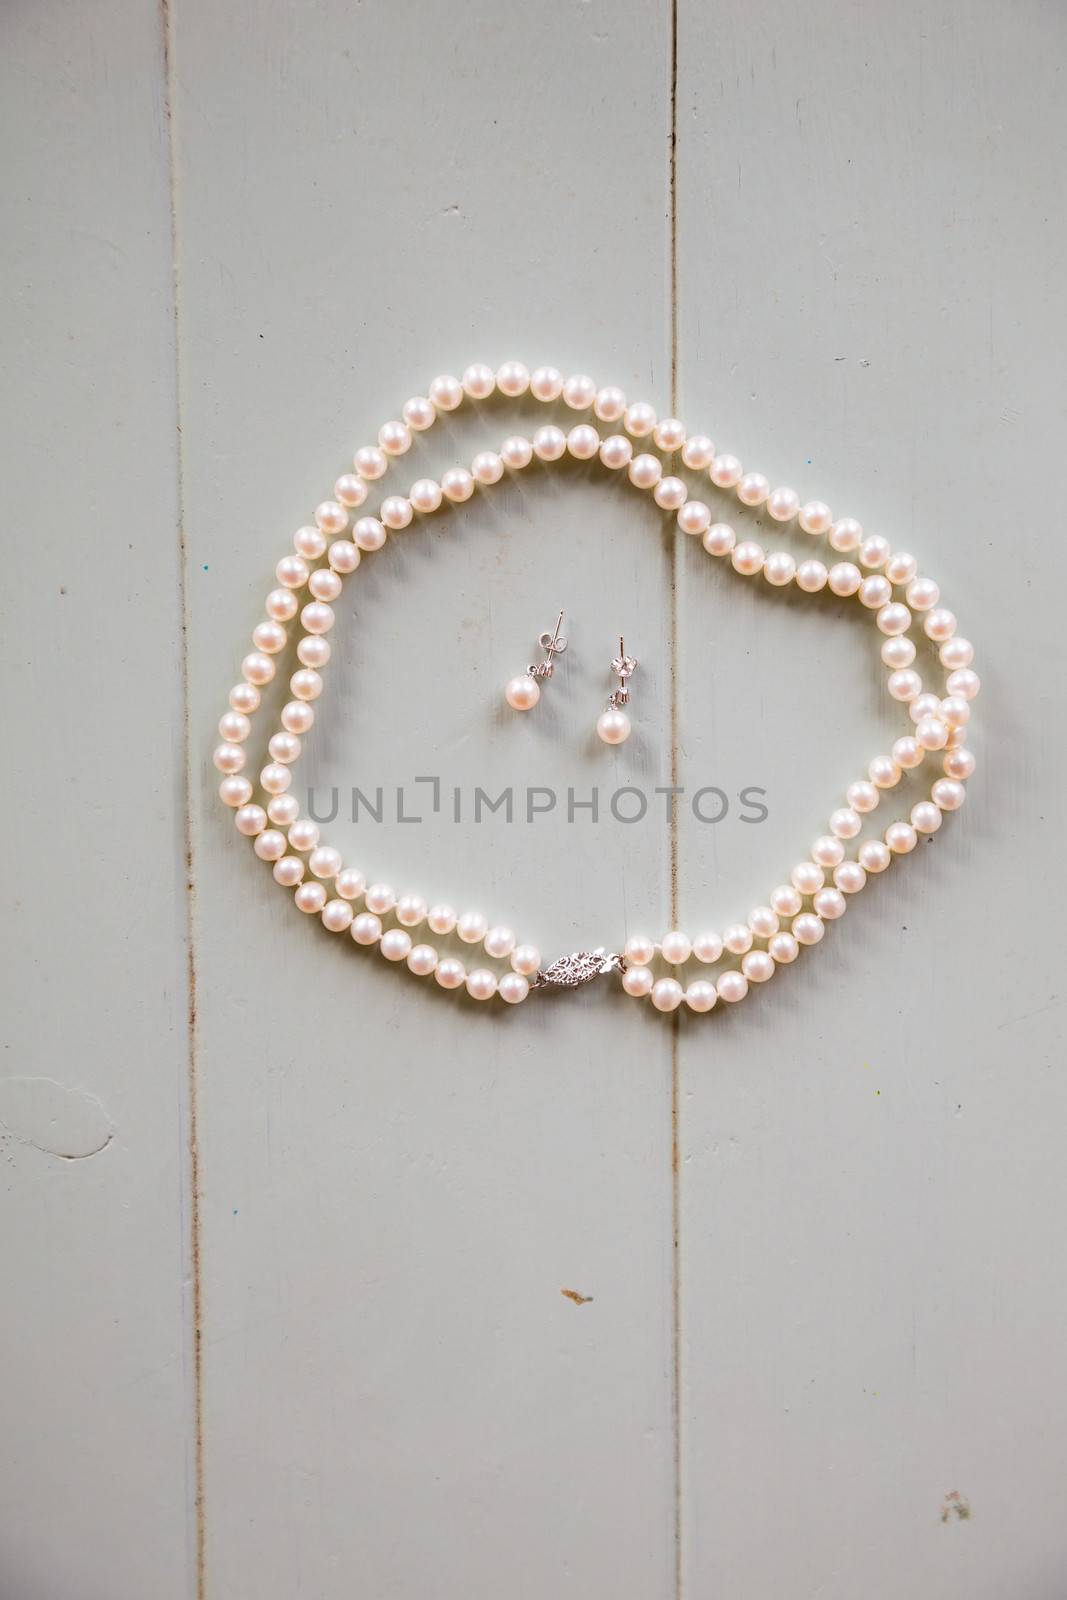 A pearl neckalce and some earrings are waiting on the table for the bride to finish getting ready and put on her jewelry.